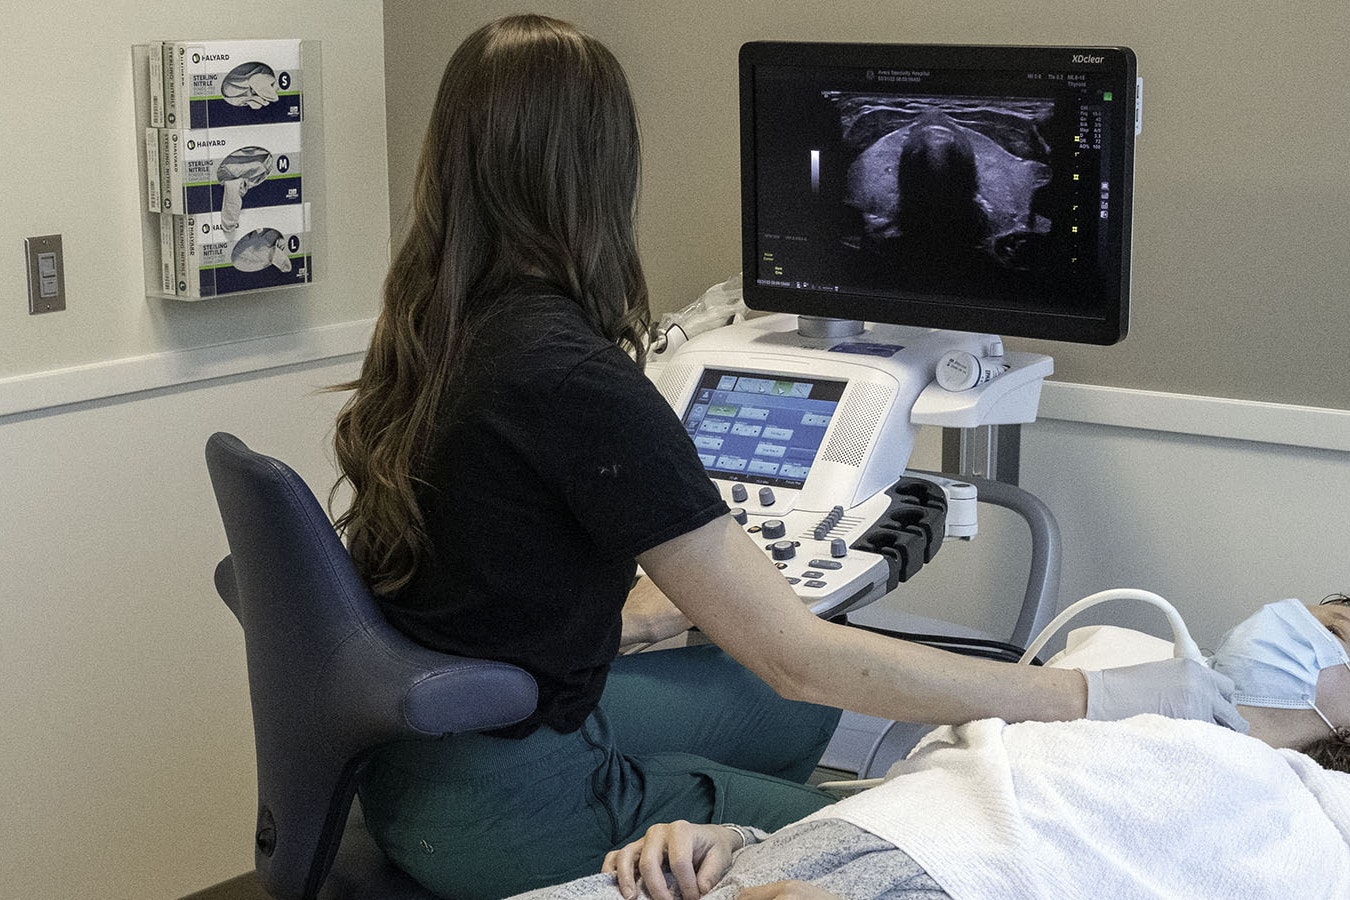 State-of-the-art ultrasound equipment is going to 143 health clinics across rural Wyoming thanks to a $13.9 million donation from the Helmsley Charitable Trust.